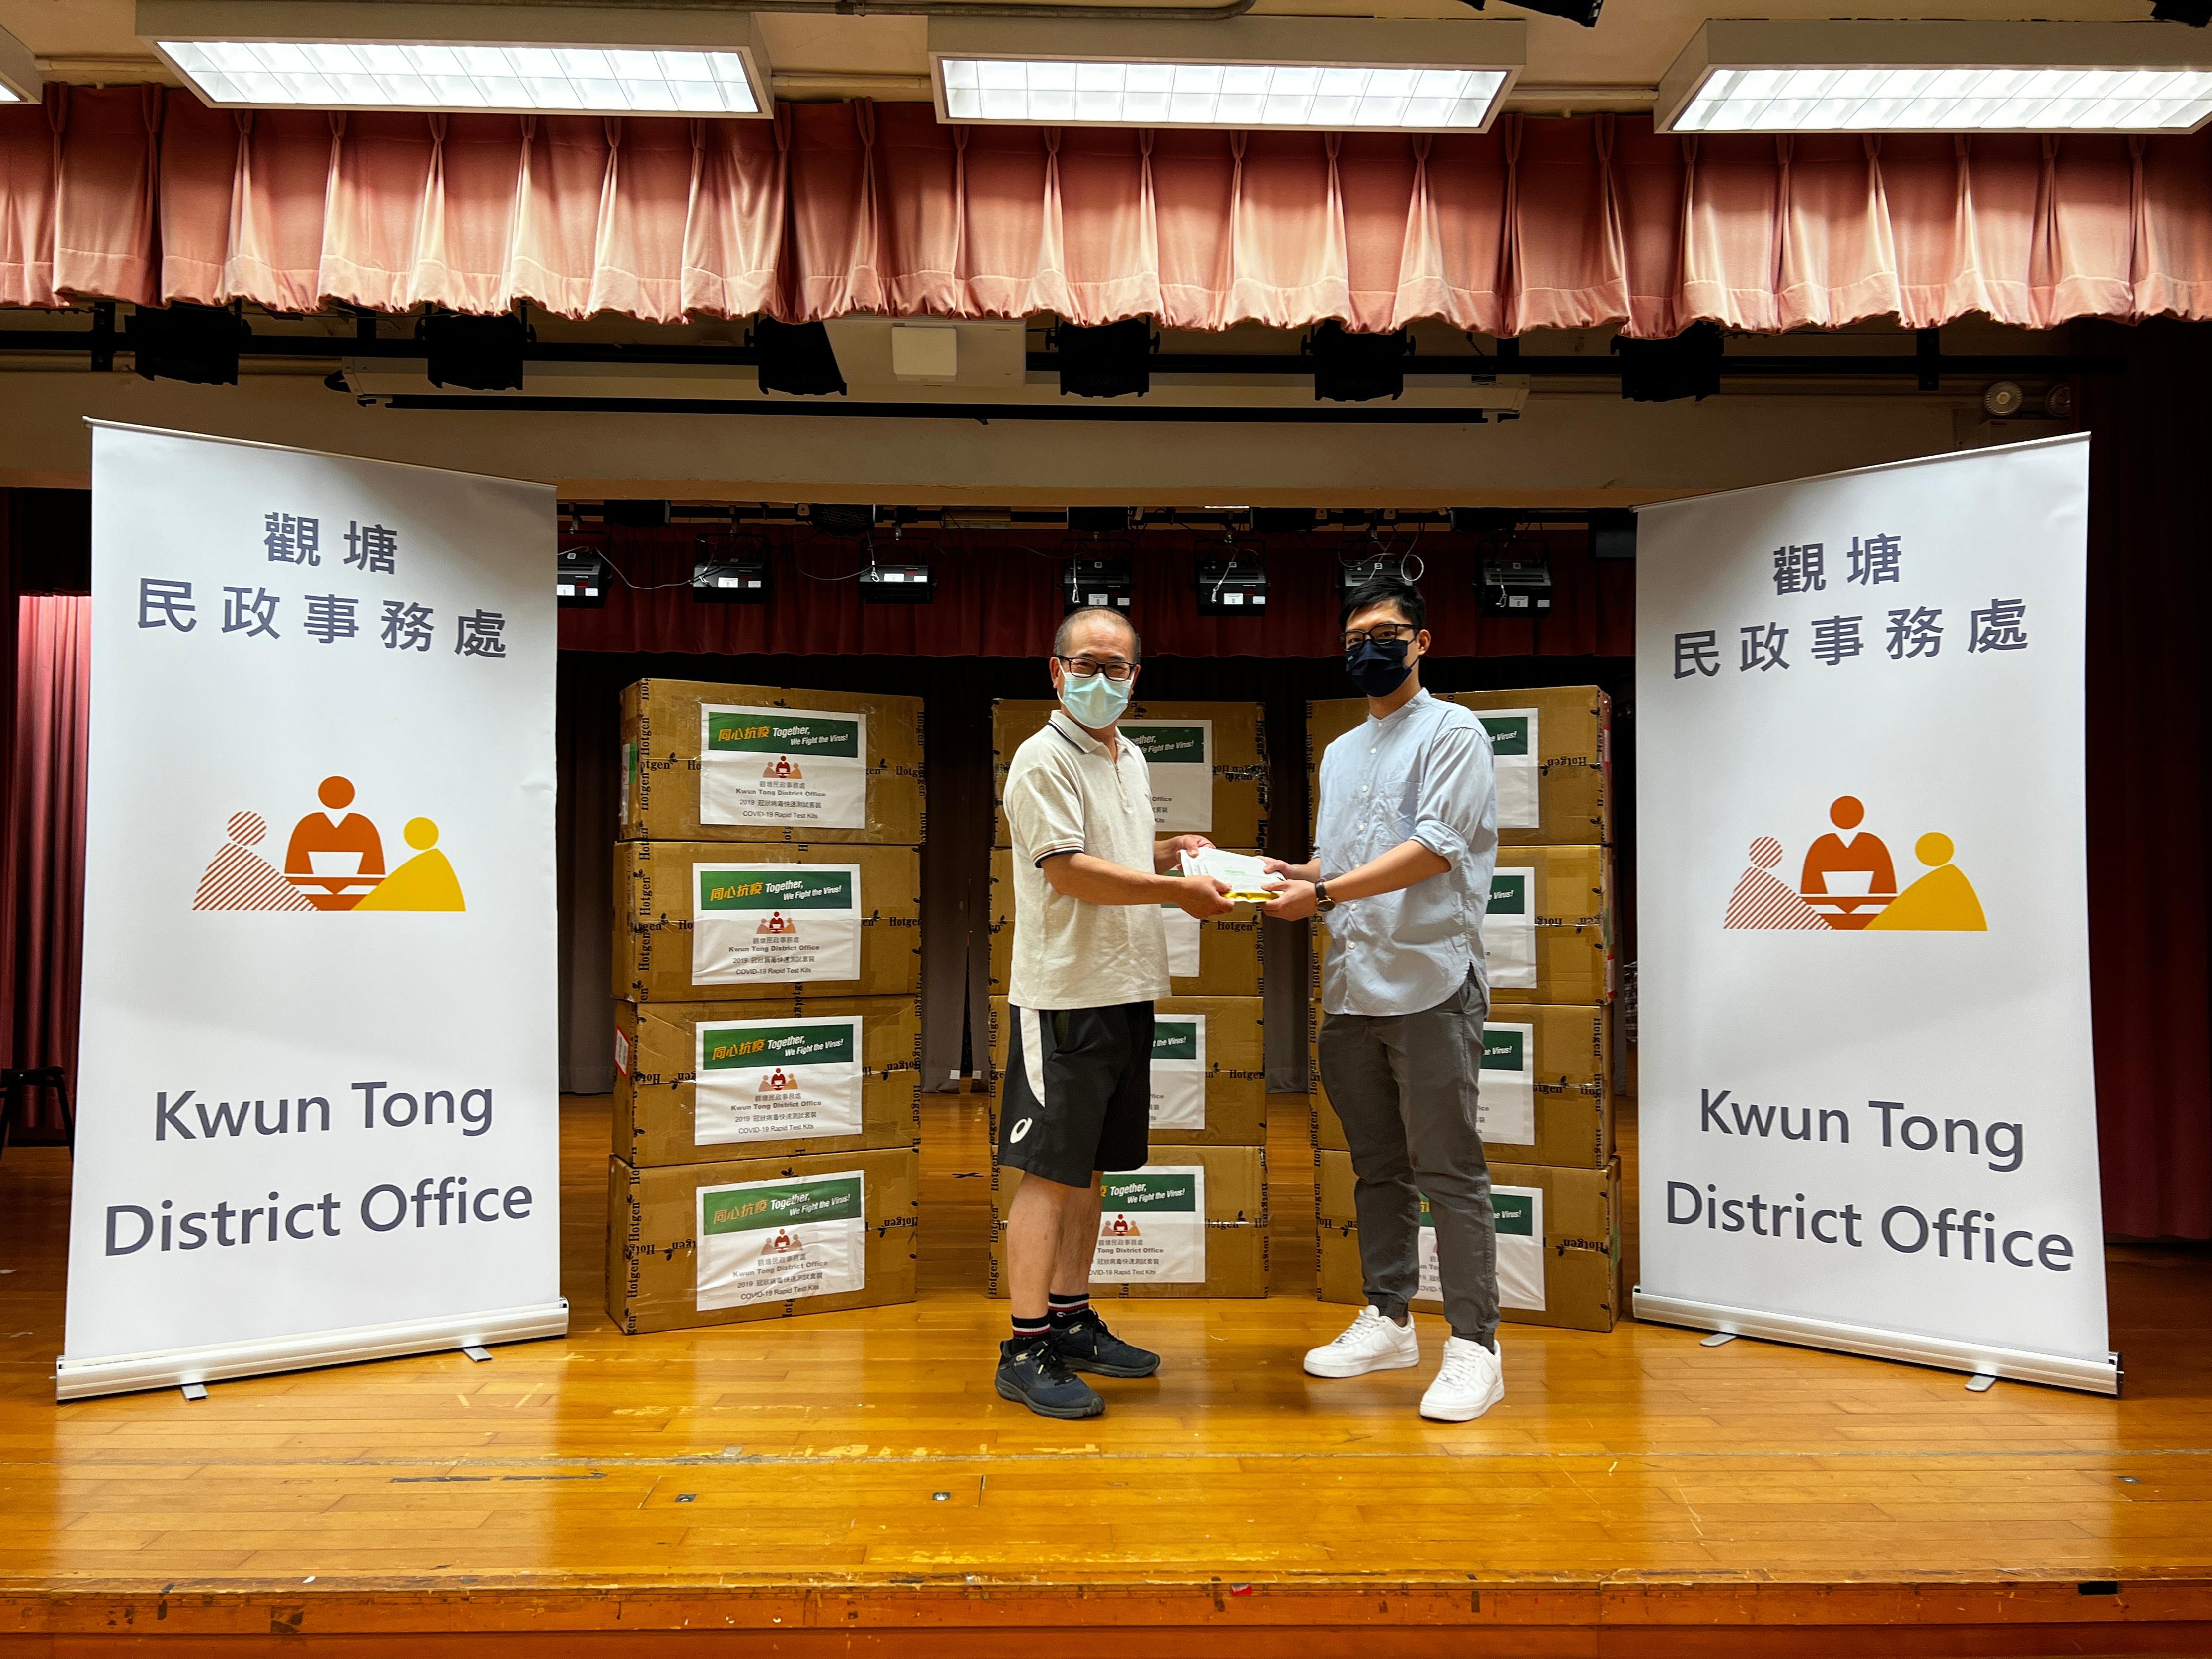 The Kwun Tong District Office today (April 15) distributed COVID-19 rapid test kits to households, cleansing workers and property management staff living and working in Shun Lee Estate for voluntary testing through the Housing Department and the property management company.